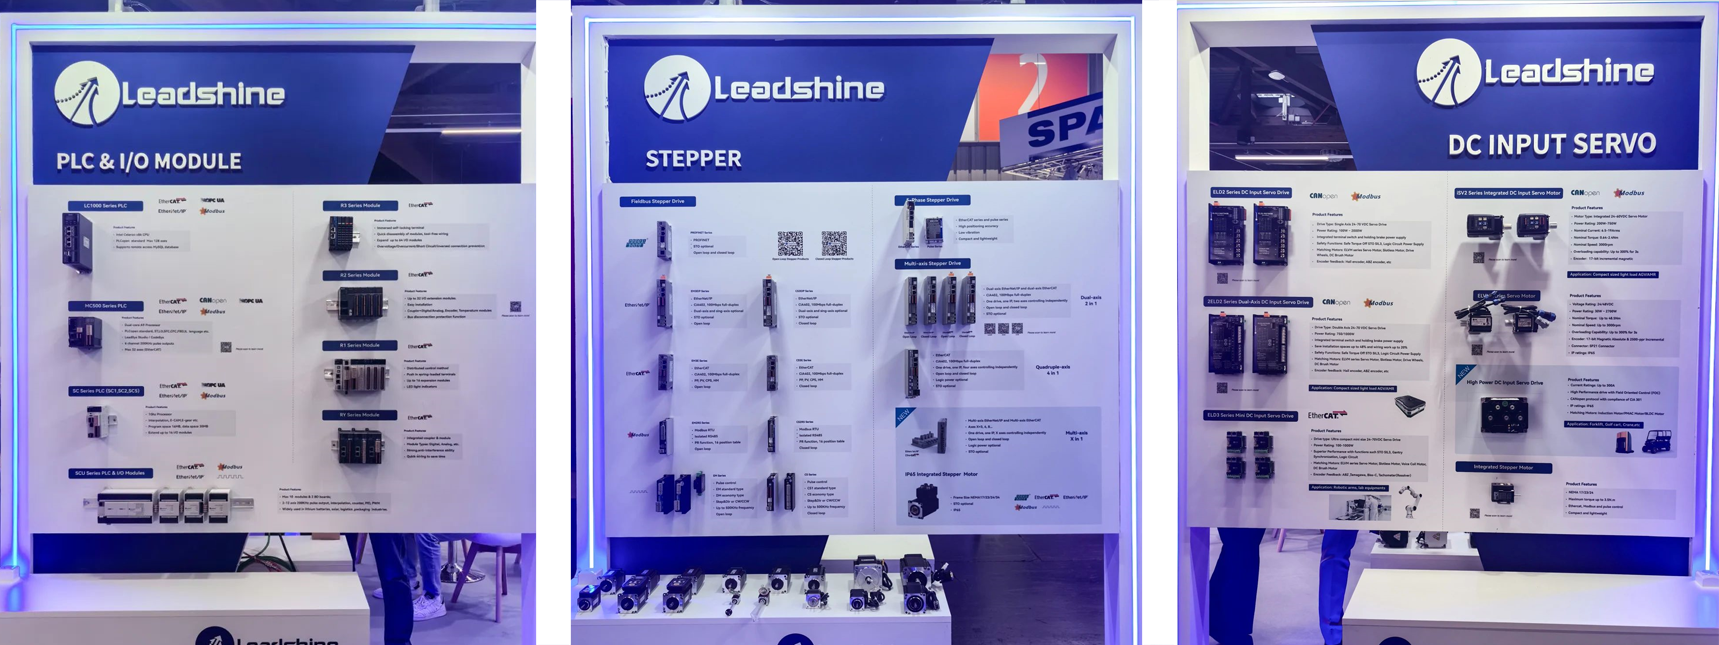 Leadshine product lines